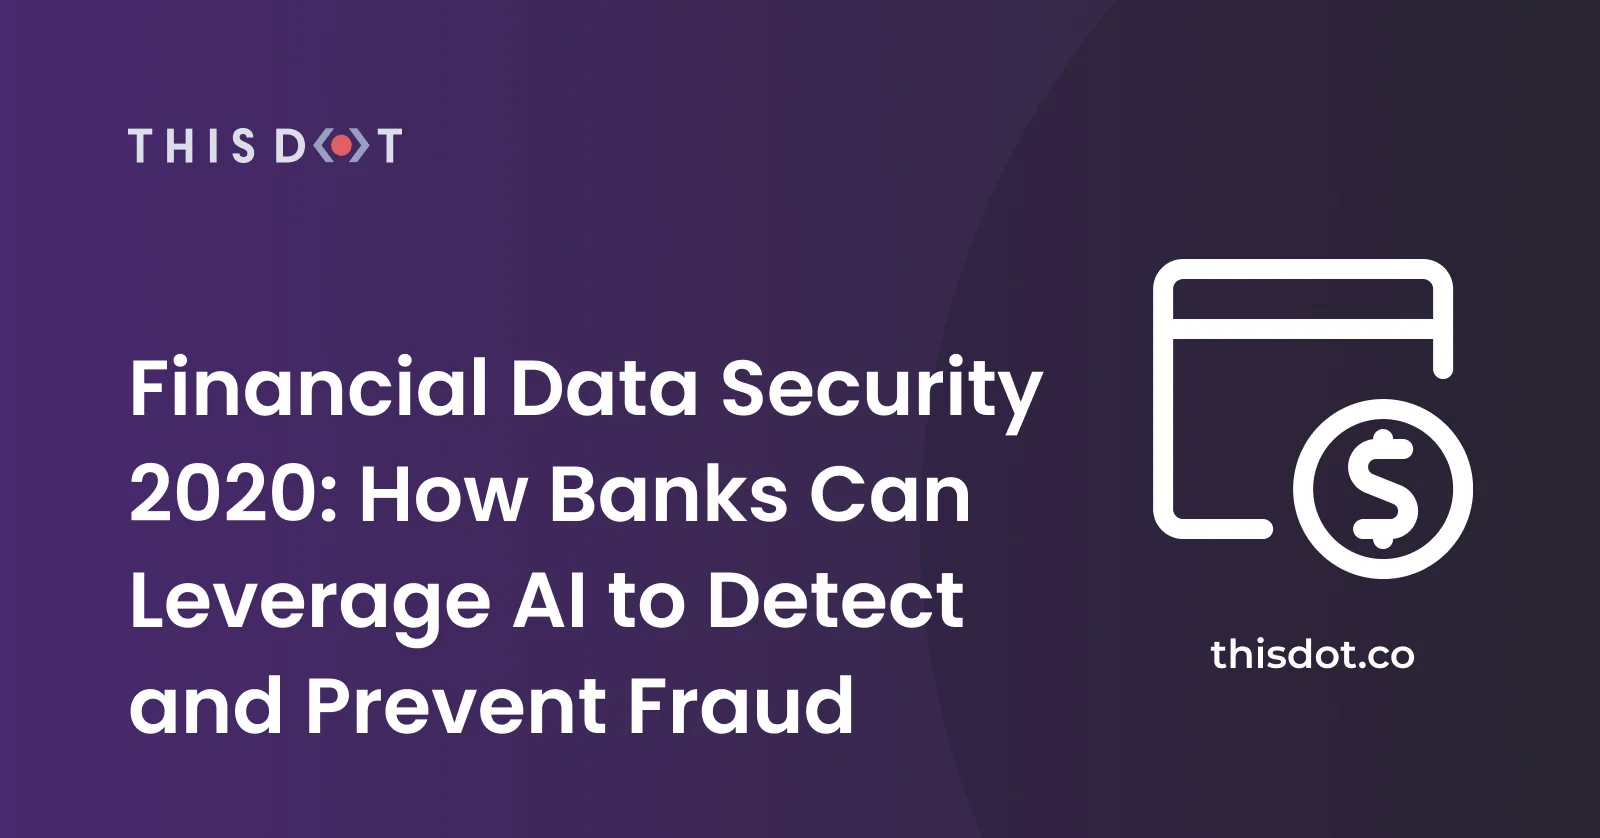 Financial Data Security 2020: How Banks Can Leverage AI to Detect and Prevent Fraud  cover image